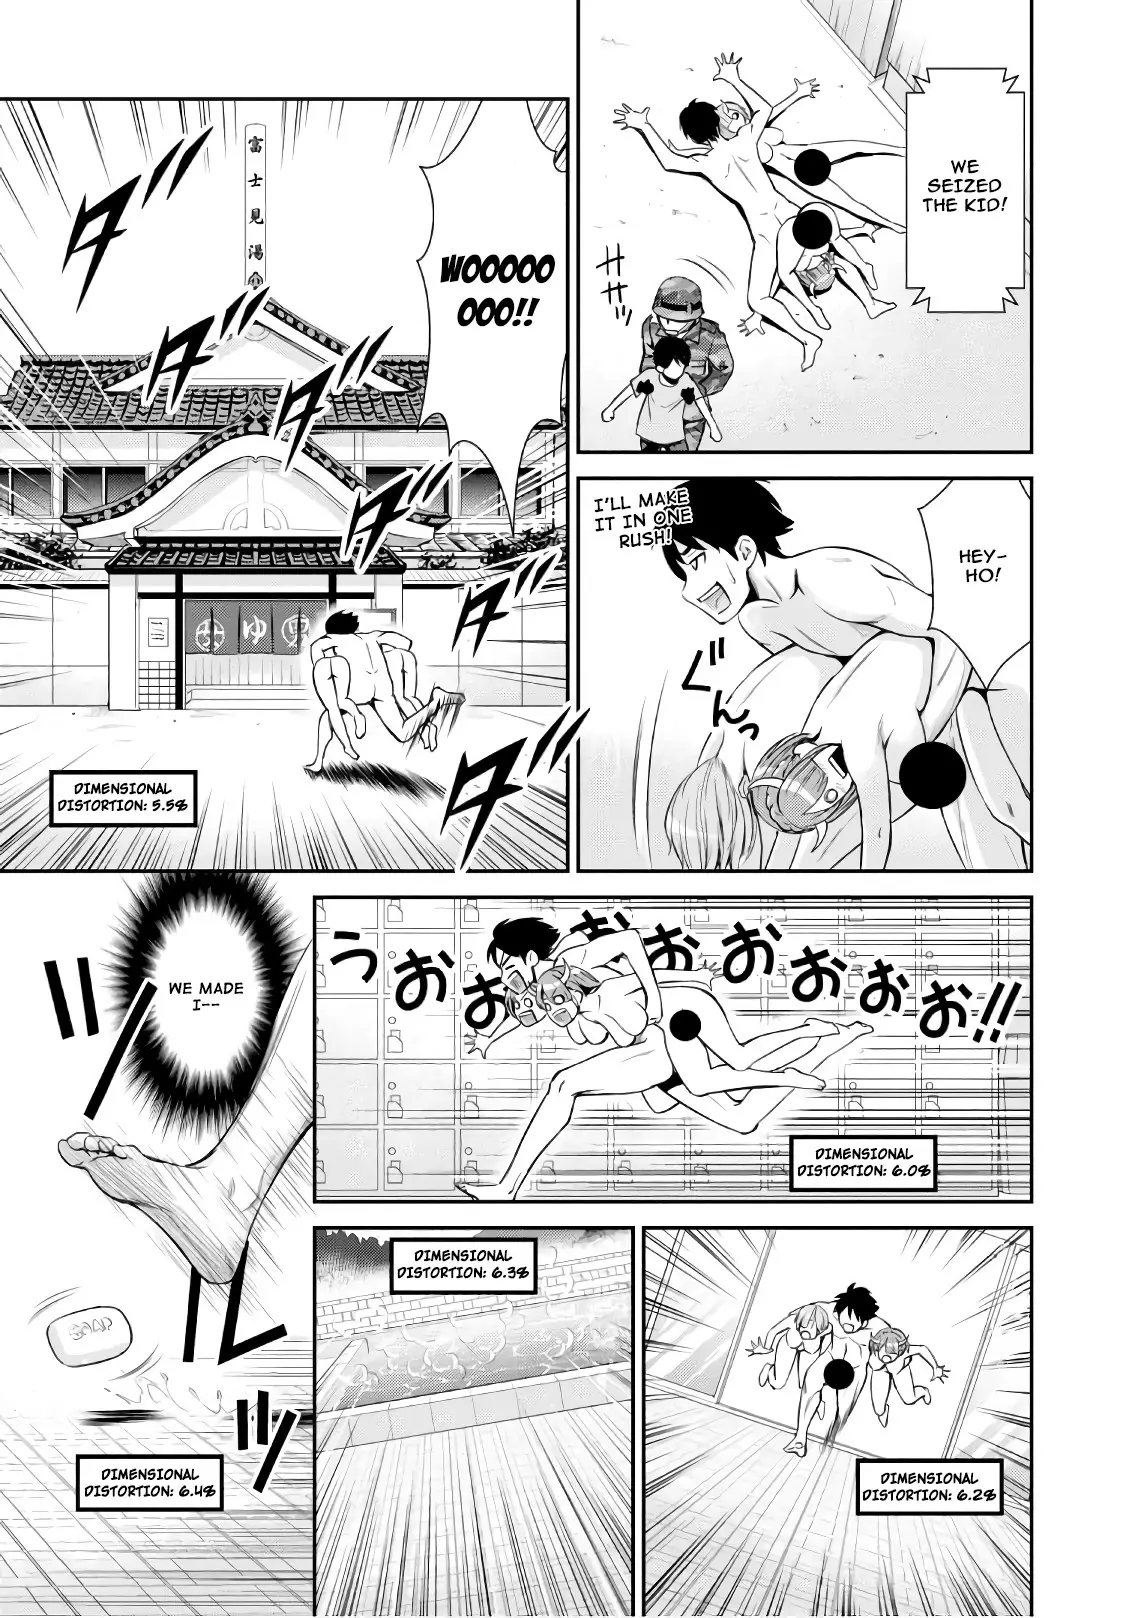 4.5 Tatami Mat Alternate World Cultural Exchange Chronicles - 2 page 28